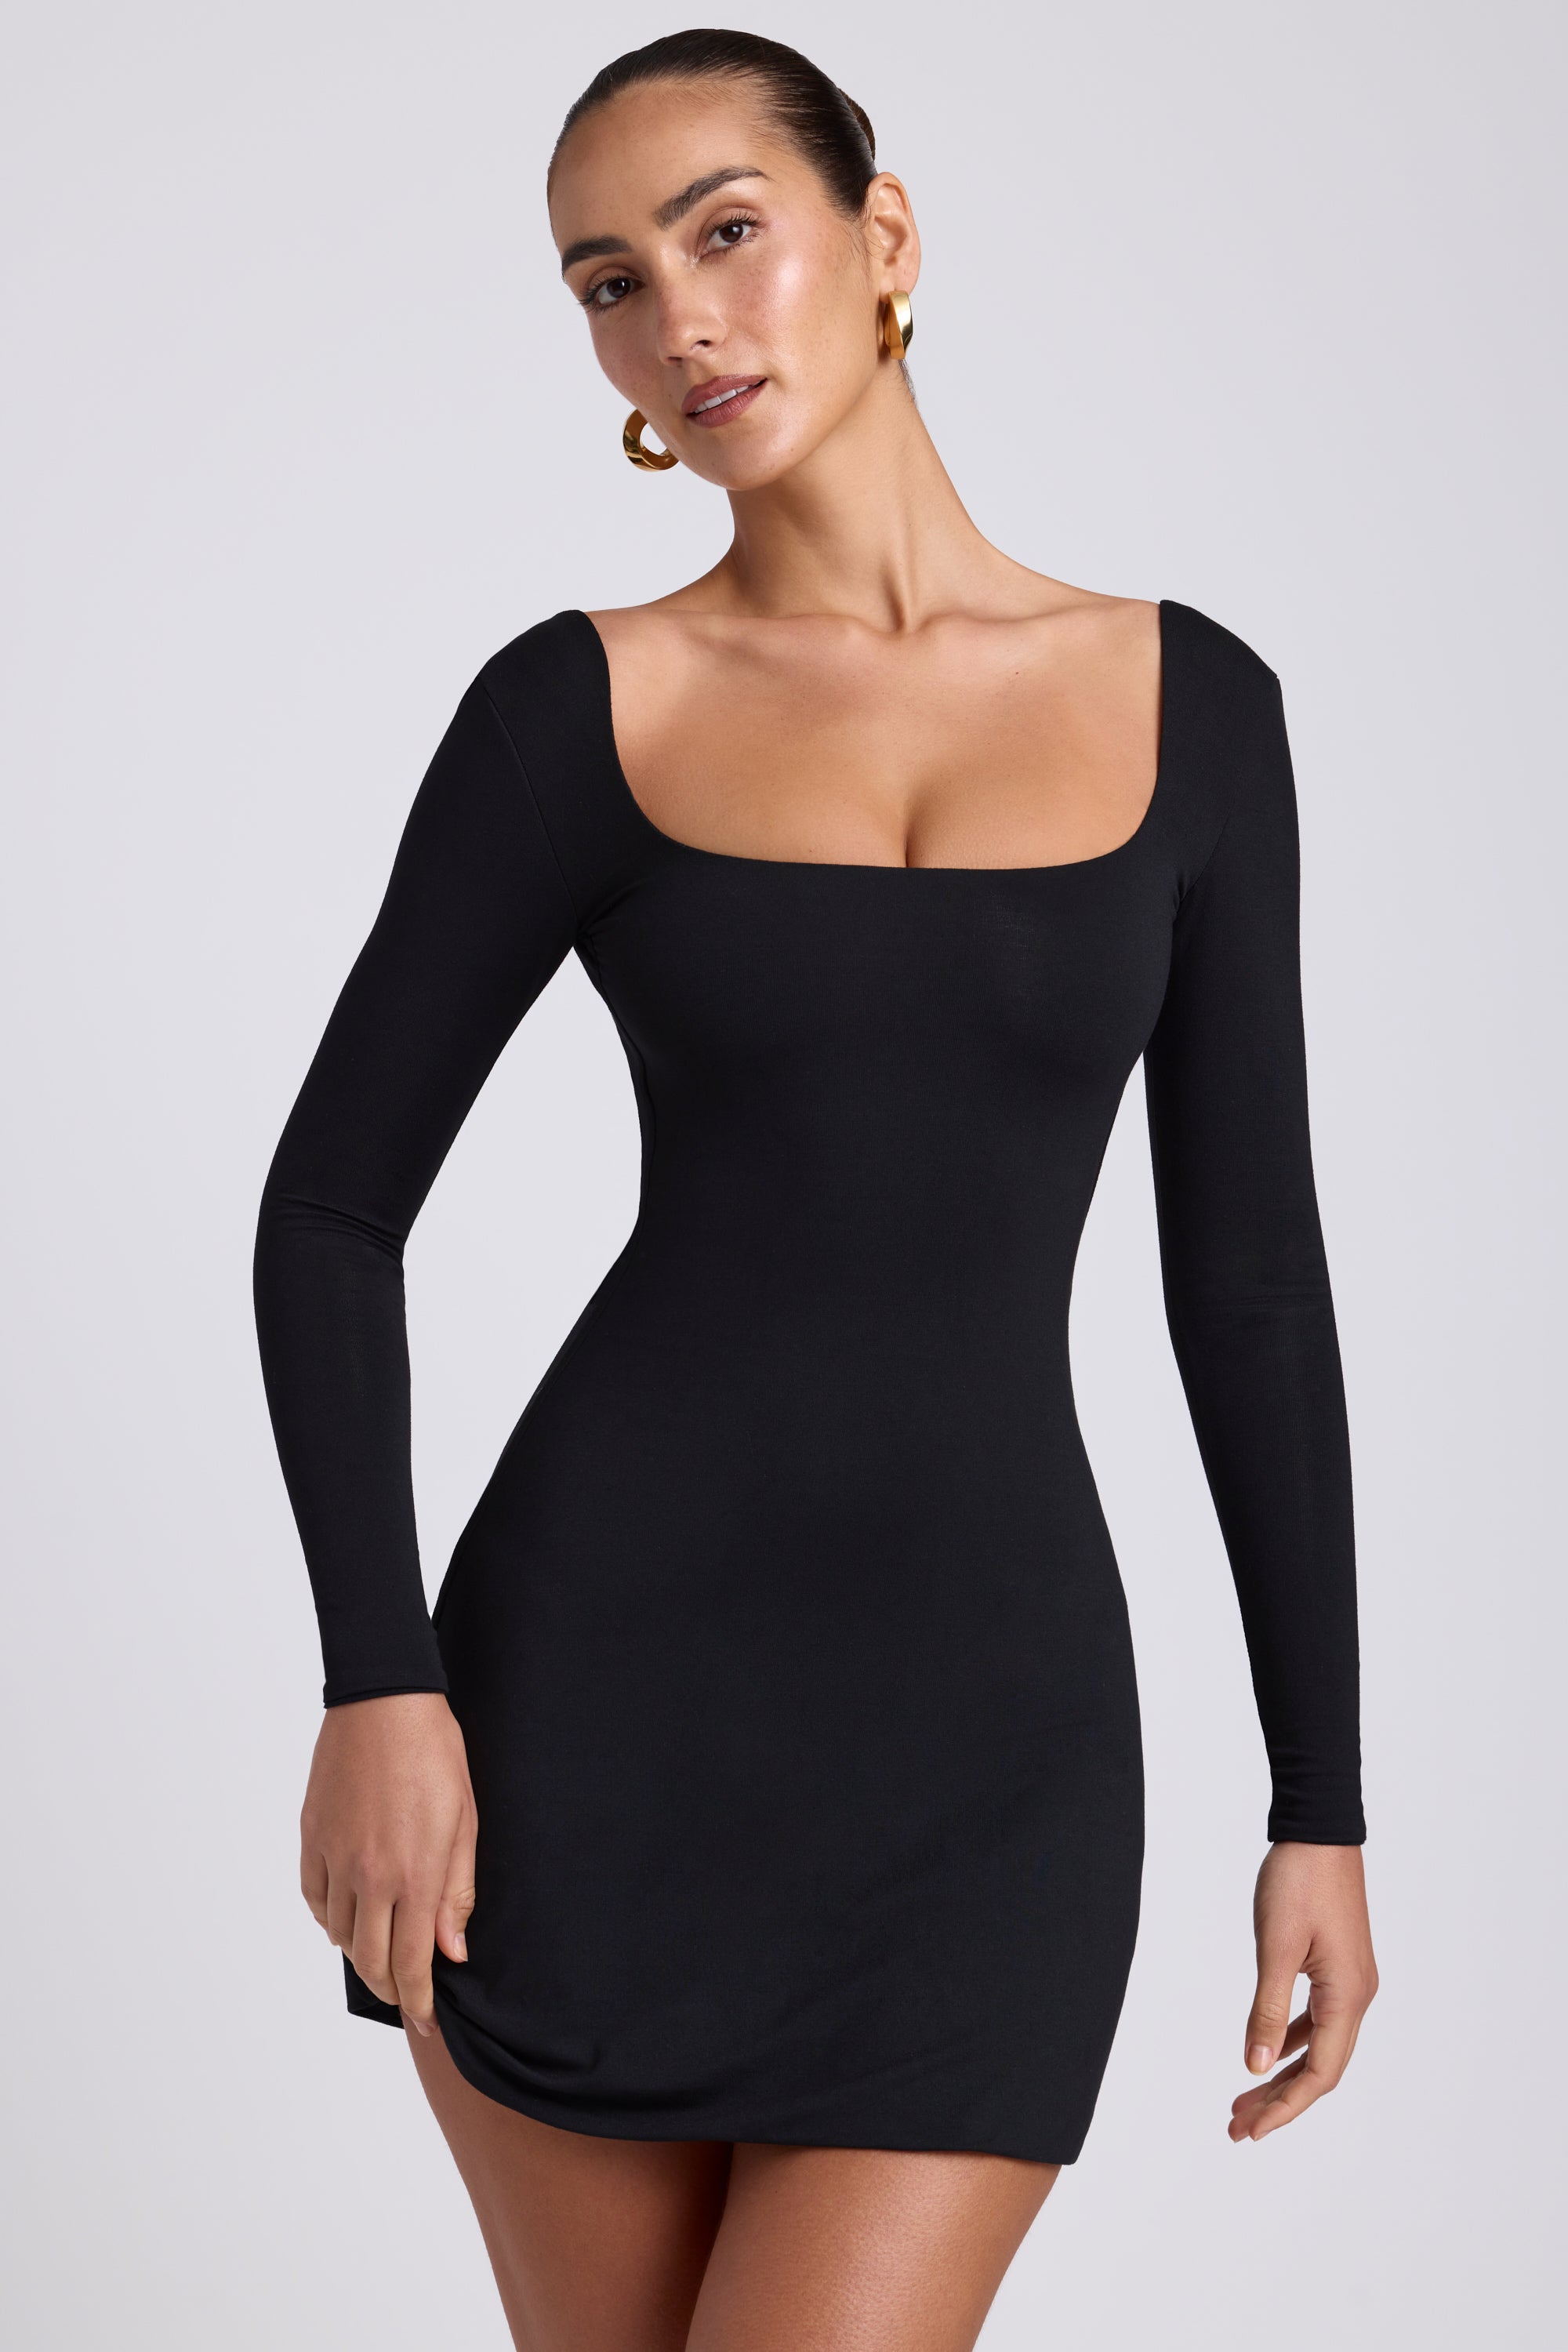 Hope Modal Square Neck Long Sleeve Mini Dress in Black | Oh Polly